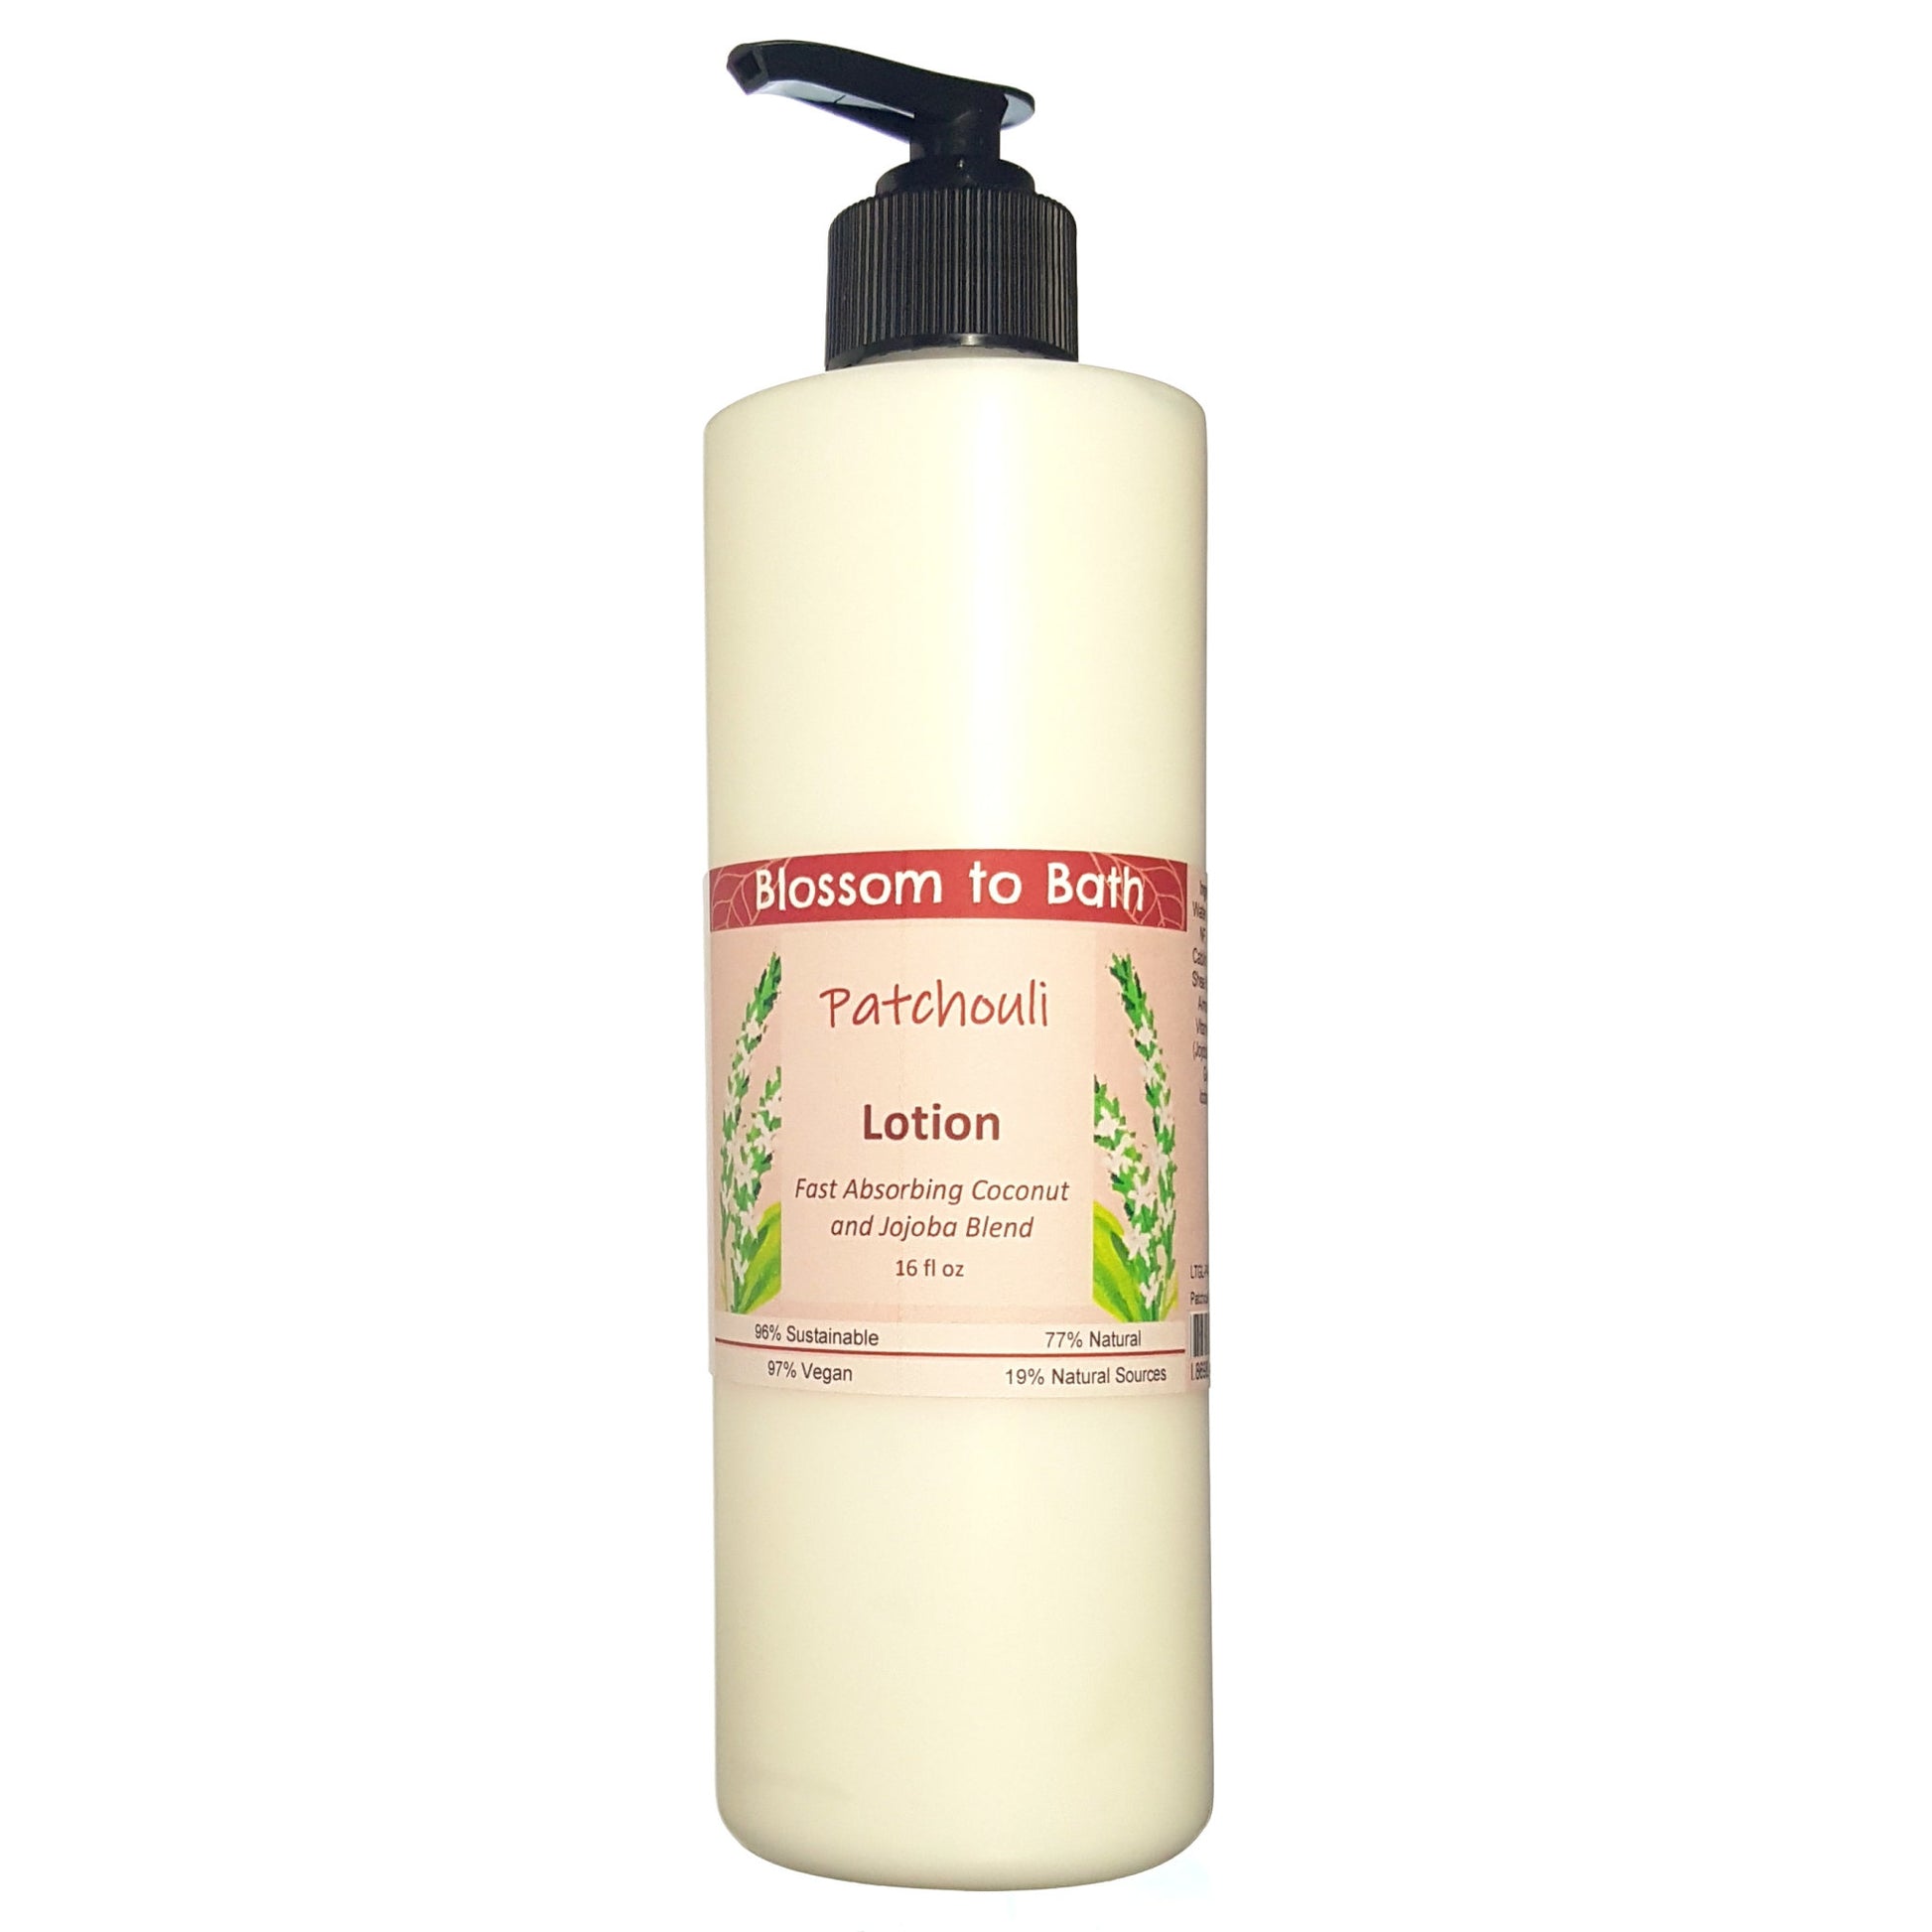 Buy Blossom to Bath Patchouli Lotion from Flowersong Soap Studio.  Daily moisture luxury that soaks in quickly made with organic oils and butters that soften and smooth the skin  The pure earthy, woody, spicy scent of straight Patchouli.